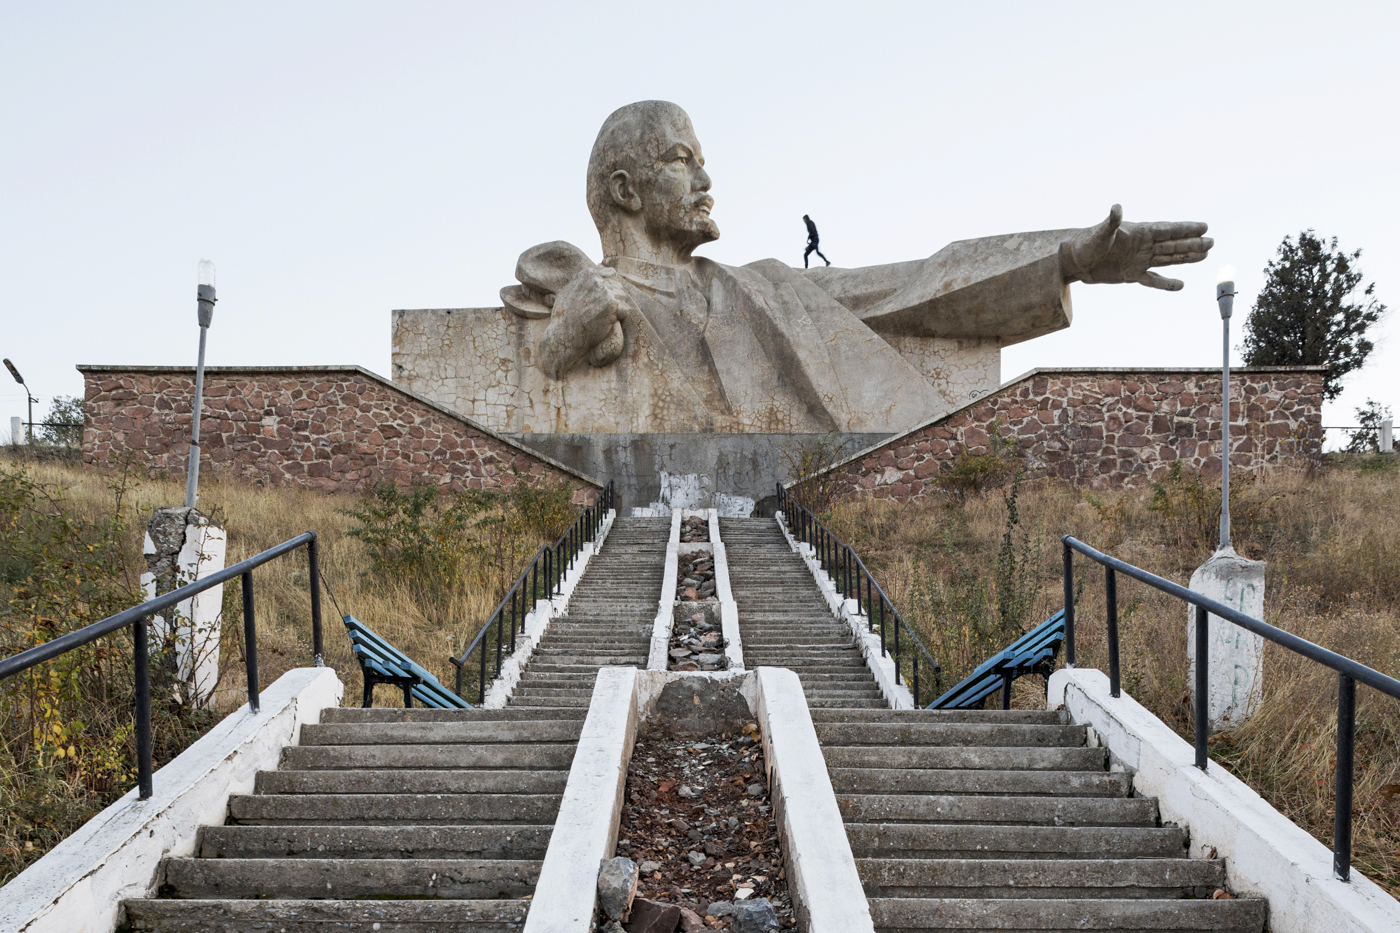 See Central Asia’s unique Soviet architecture in all its brutal glory